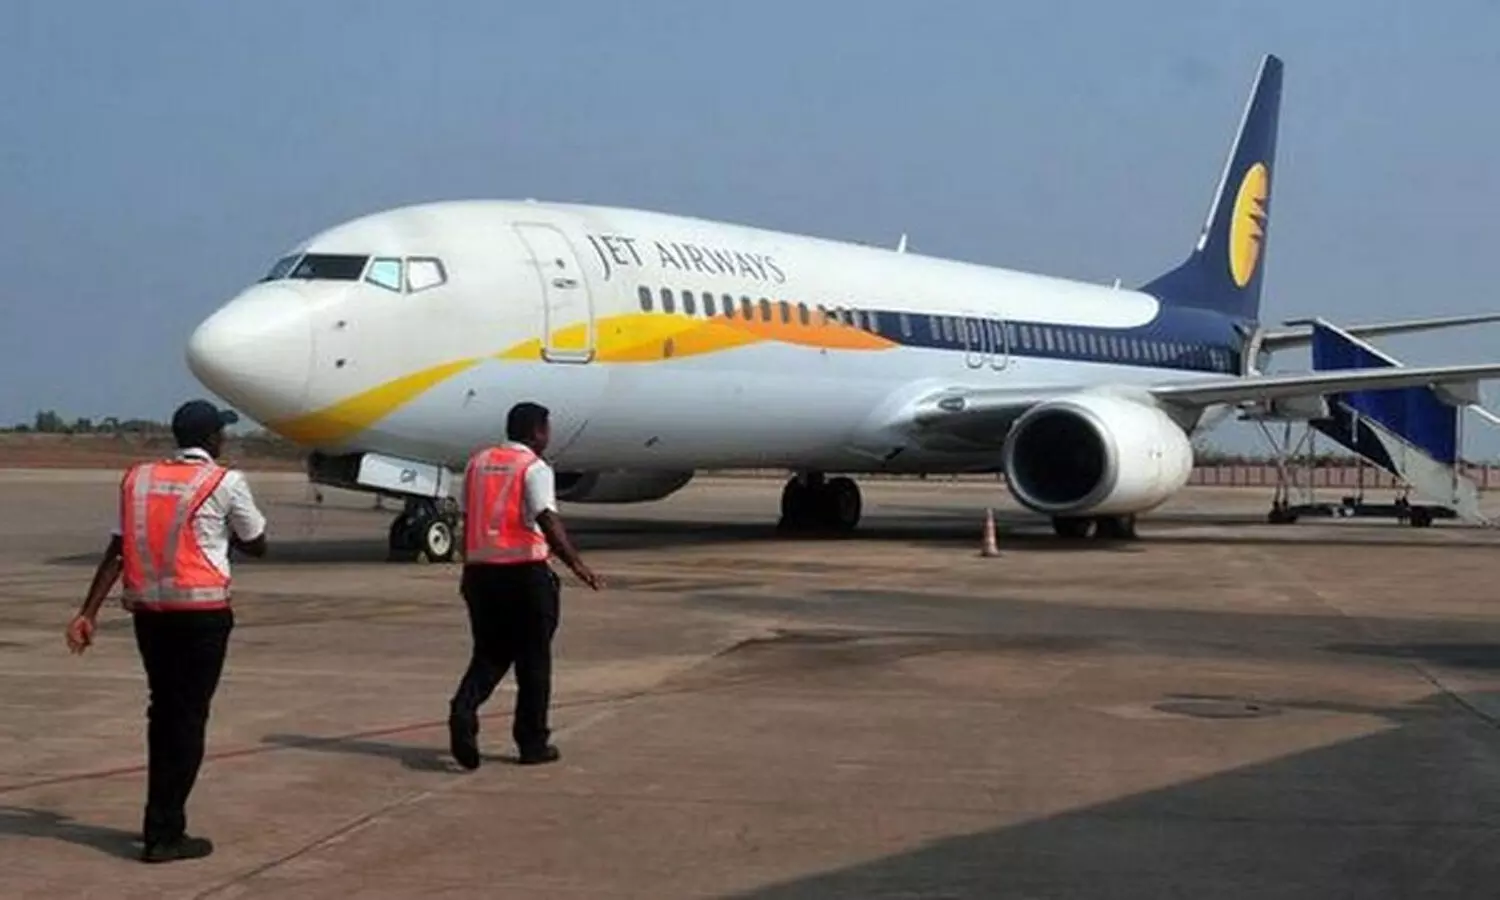 Jet flights will resume its domestic operations in first quarter of 2022